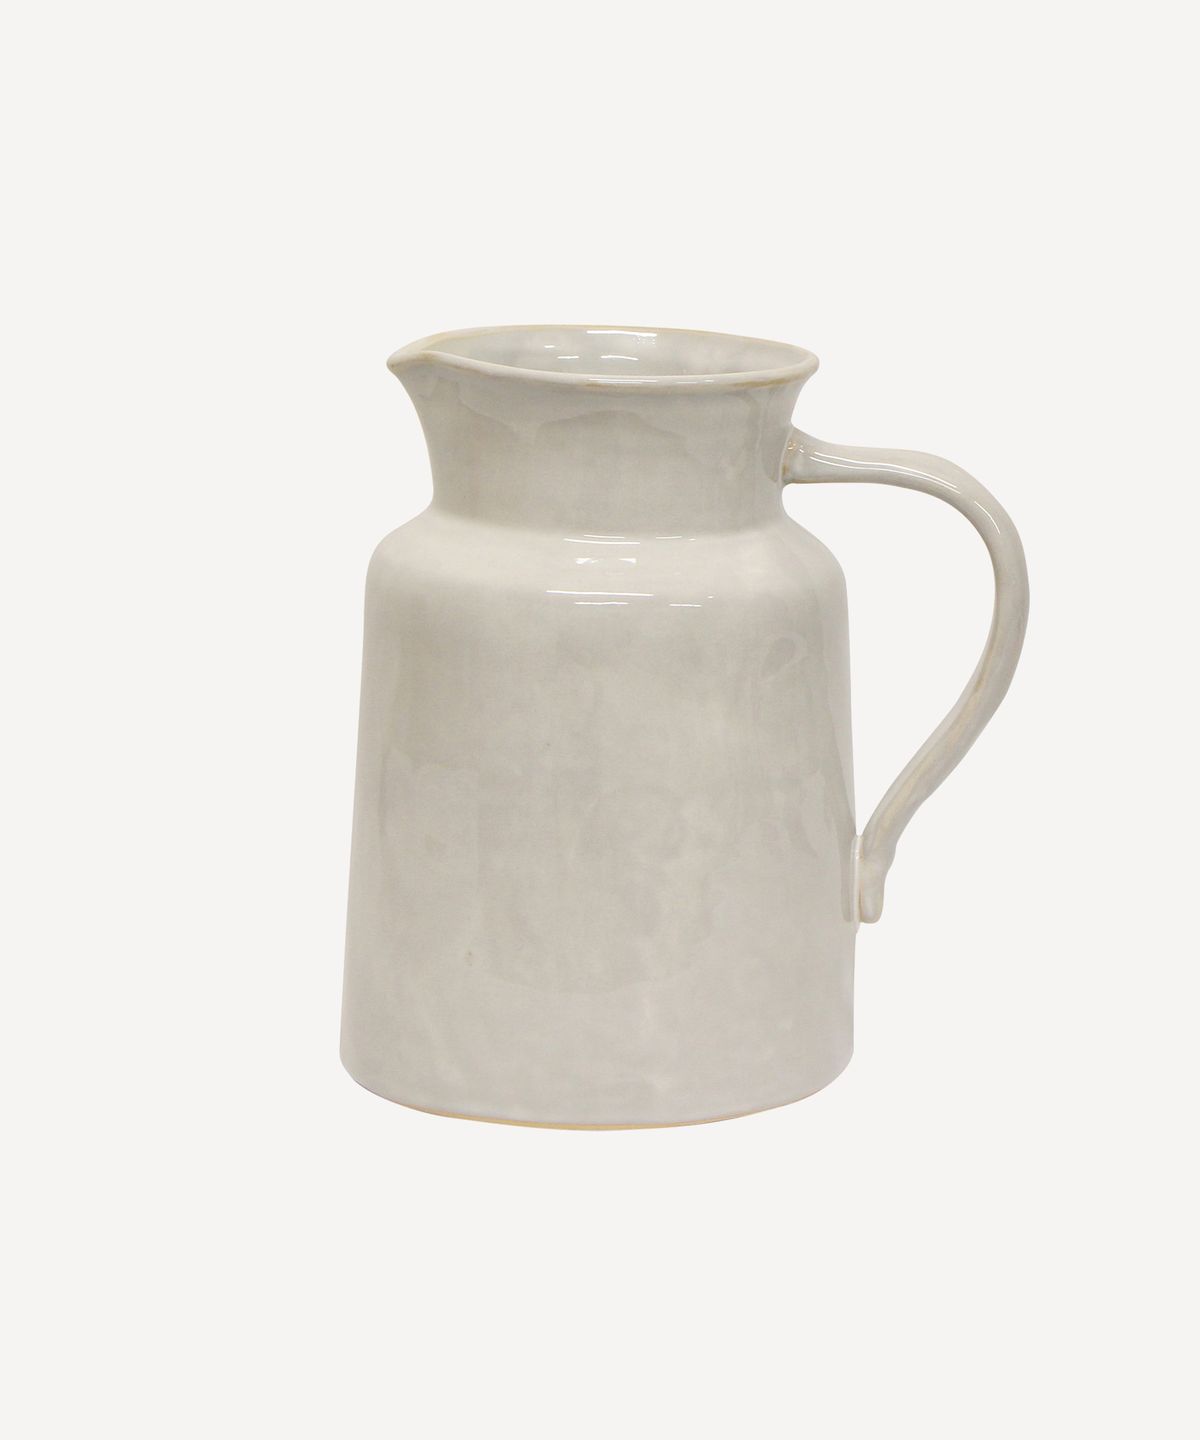 Franco Rustic White Large Pitcher